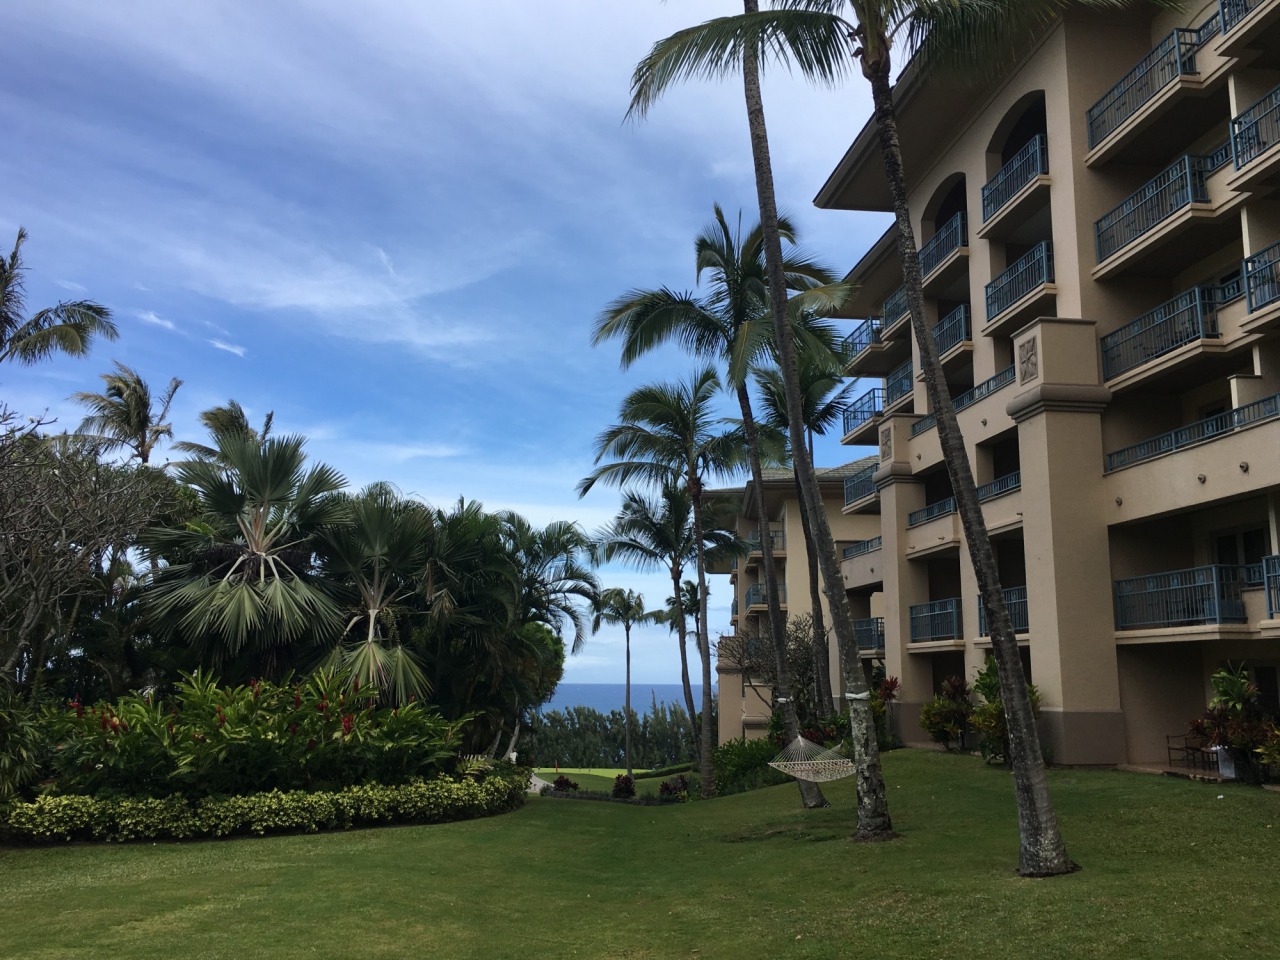 Lawn Outside Our Garden View 1BR Residence Suite, Ritz-Carlton Kapalua Maui Review